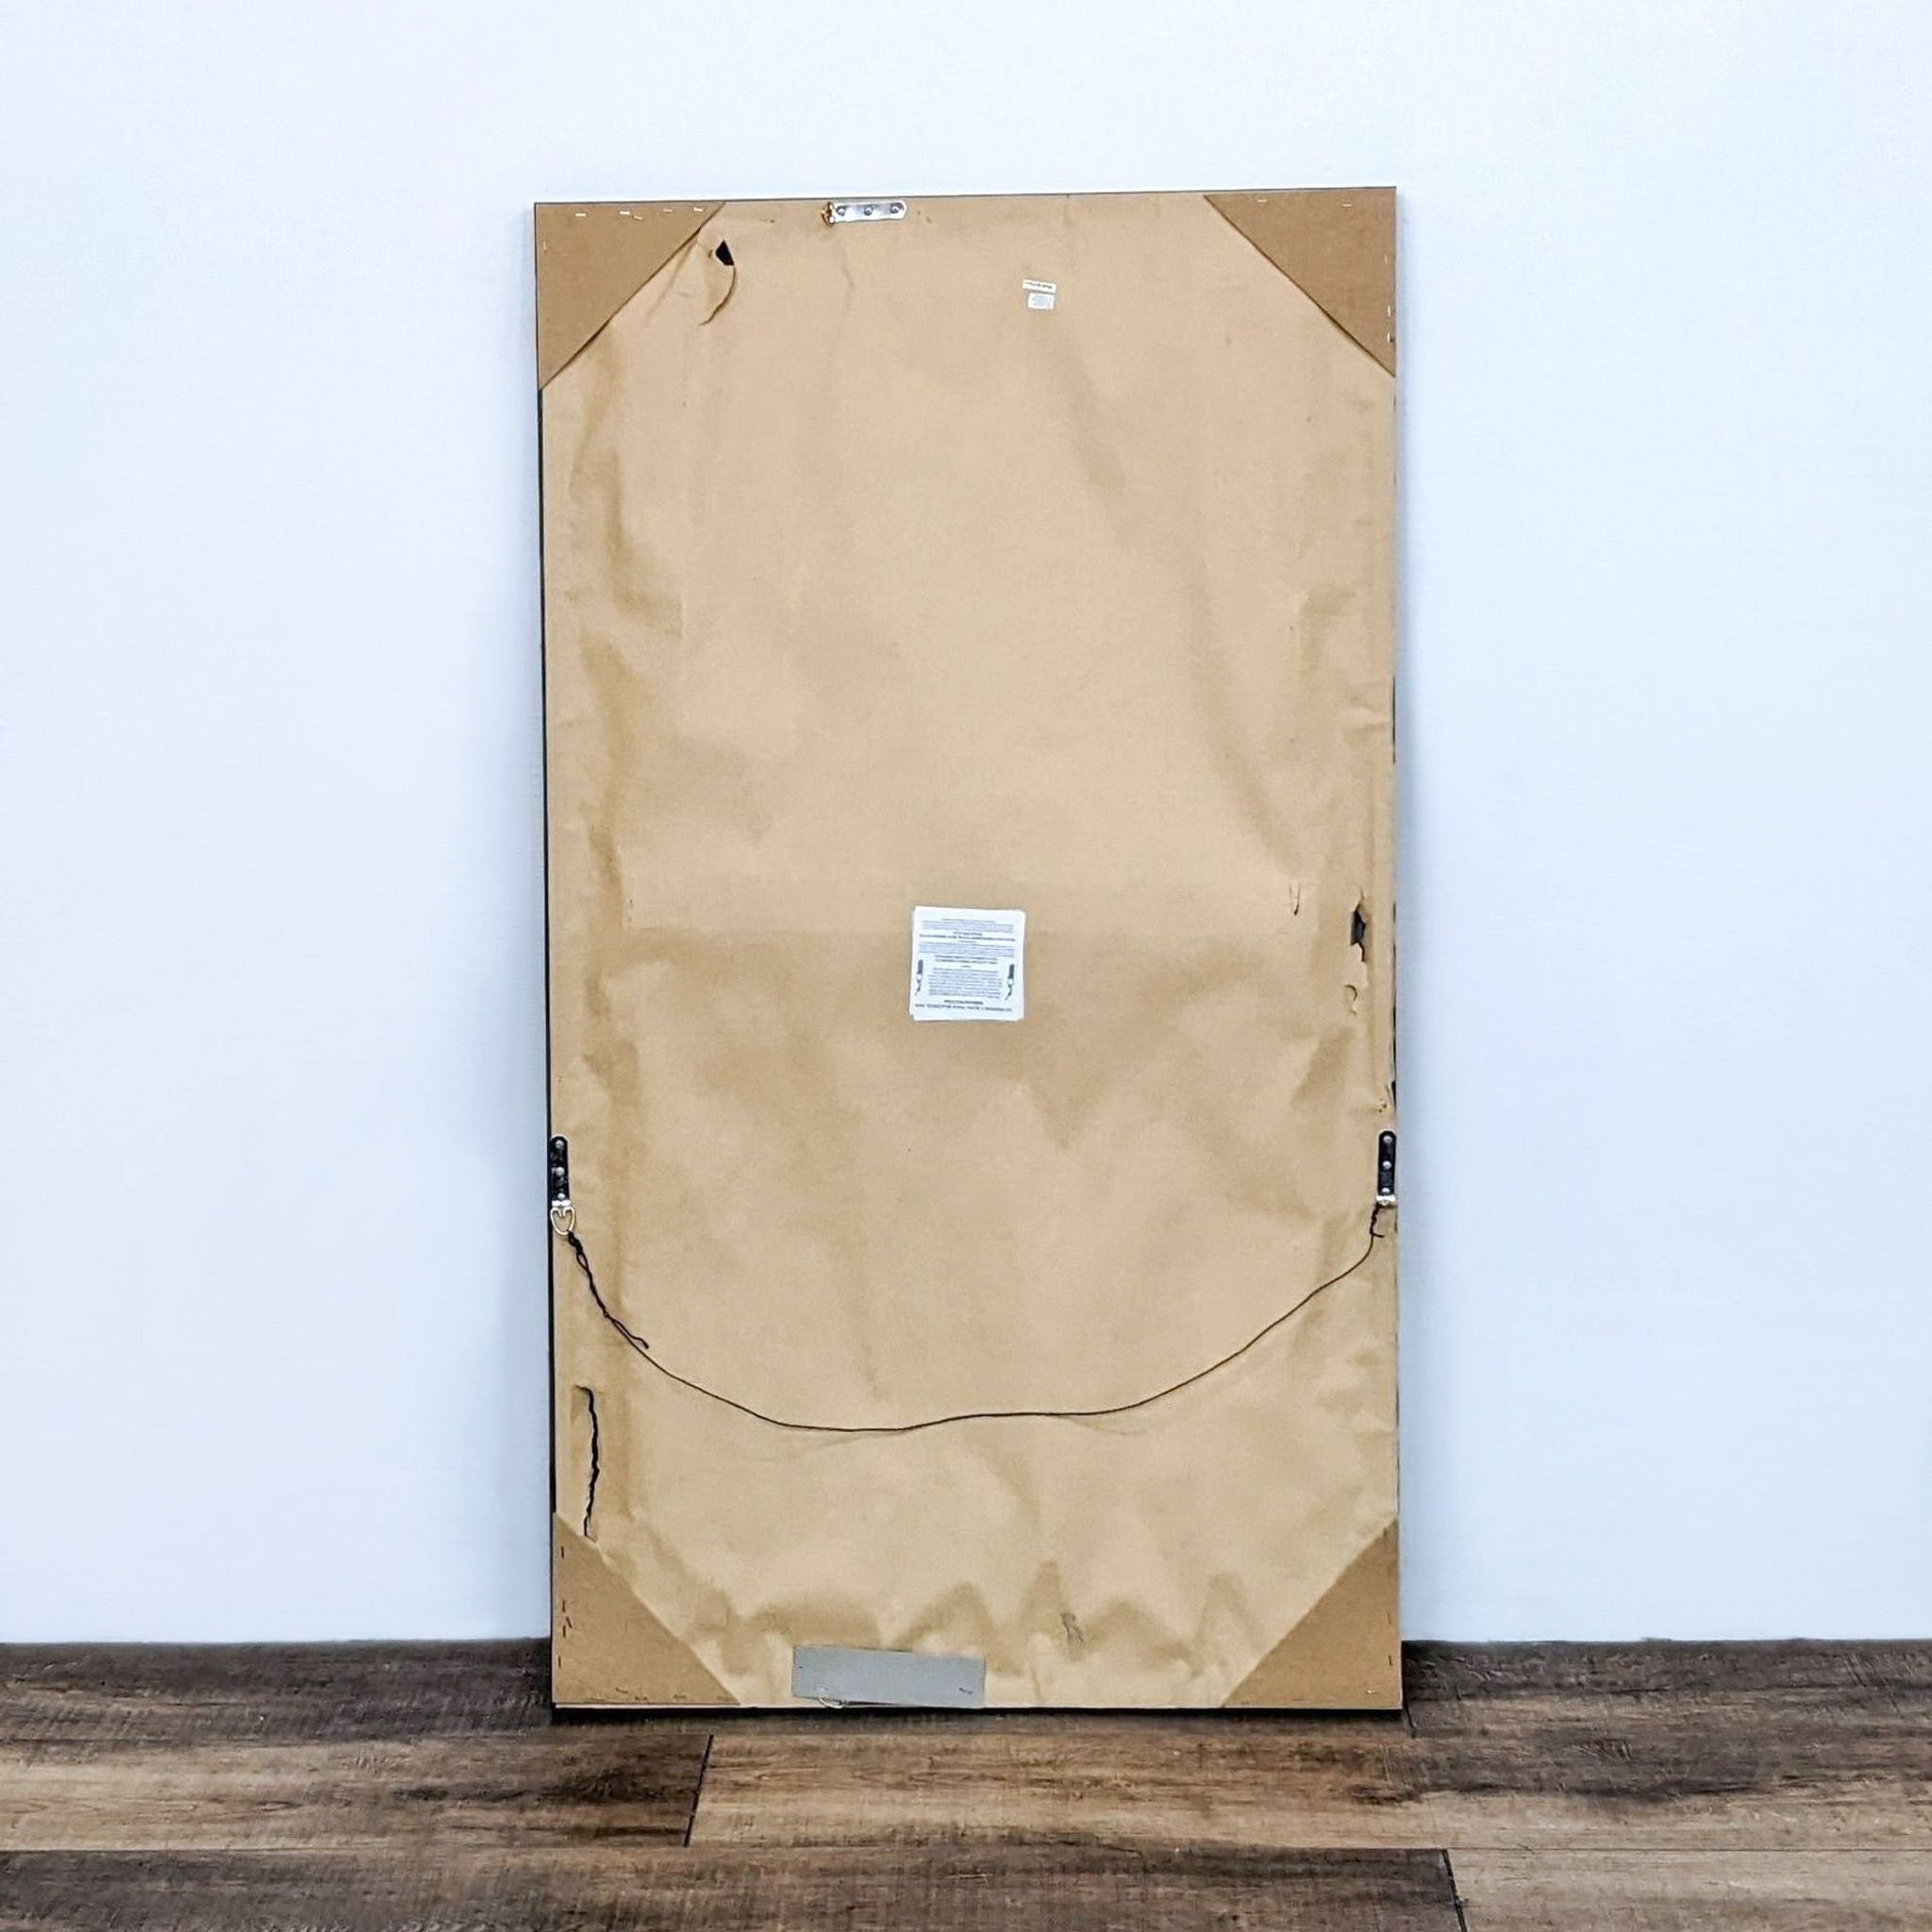 Back of a World Market rectangle mirror with paper backing and hanging hardware visible on a wooden floor against a white wall.